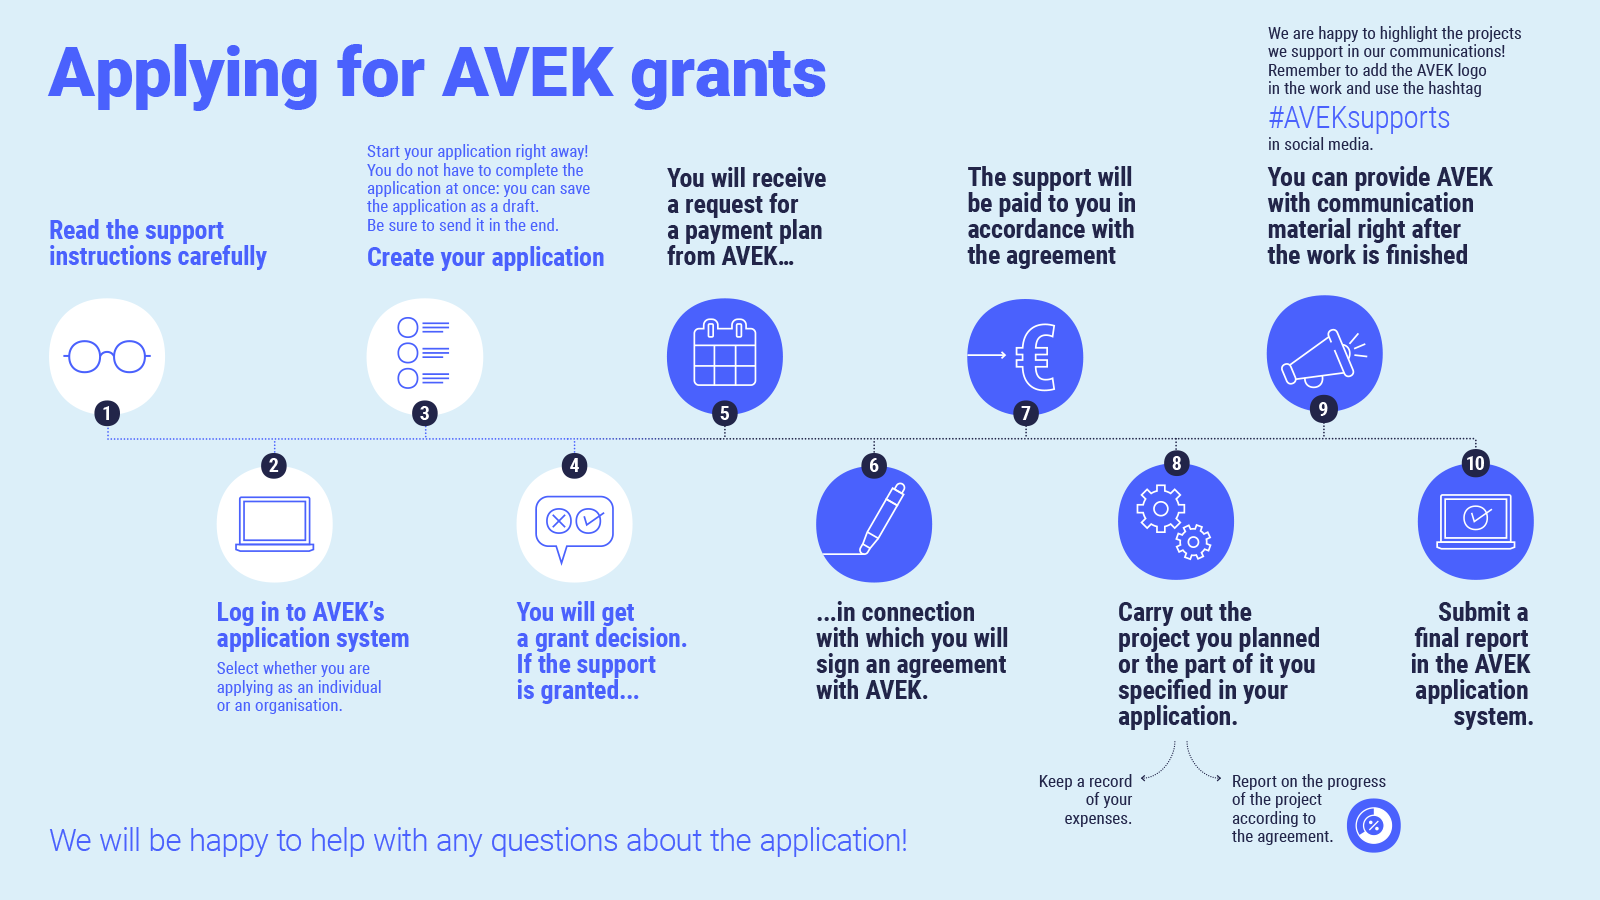 Applying for AVEK grants 1. Read the support instructions carefully. 2. Log in to AVEK’s application system. Select whether you are applying as an individual or an organisation. 3. Create your application. Start your application right away! You do not have to complete the application at once: you can save the application as a draft. Be sure to send it in the end. 4. You will get a grant decision. If the support is granted... 5. You will receive a request for a payment plan from AVEK… 6. ...in connection with which you will sign an agreement with AVEK. 7. The support will be paid to you in accordance with the agreement. 8. Carry out the project you planned or the part of it you specified in your application. Keep a record of your expenses. Report on the progress of the project according to the agreement. 9. You can provide AVEK with communication material right after the work is finished We are happy to highlight the projects we support in our communications! Remember to add the AVEK logo in the work and use the hashtag #AVEKsupports in social media. 10. Submit a final report in the AVEK application system. We will be happy to help with any questions about the application!